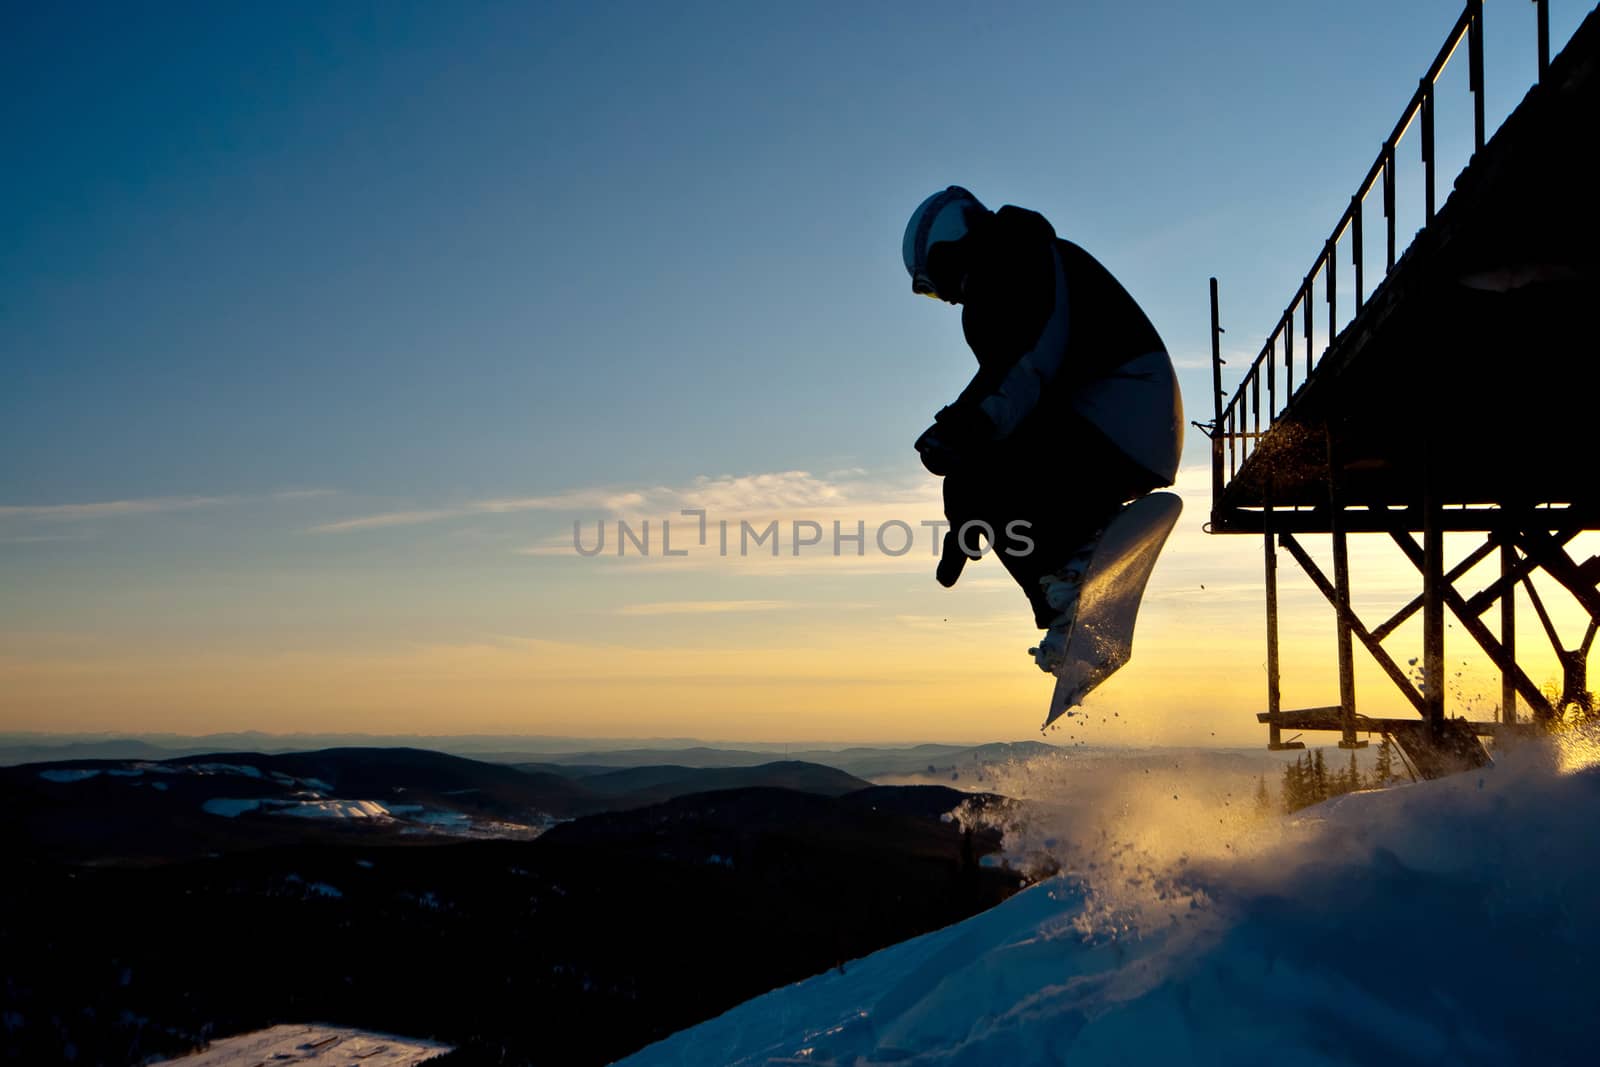 The snowboarder jumping from the bridge in Siberia